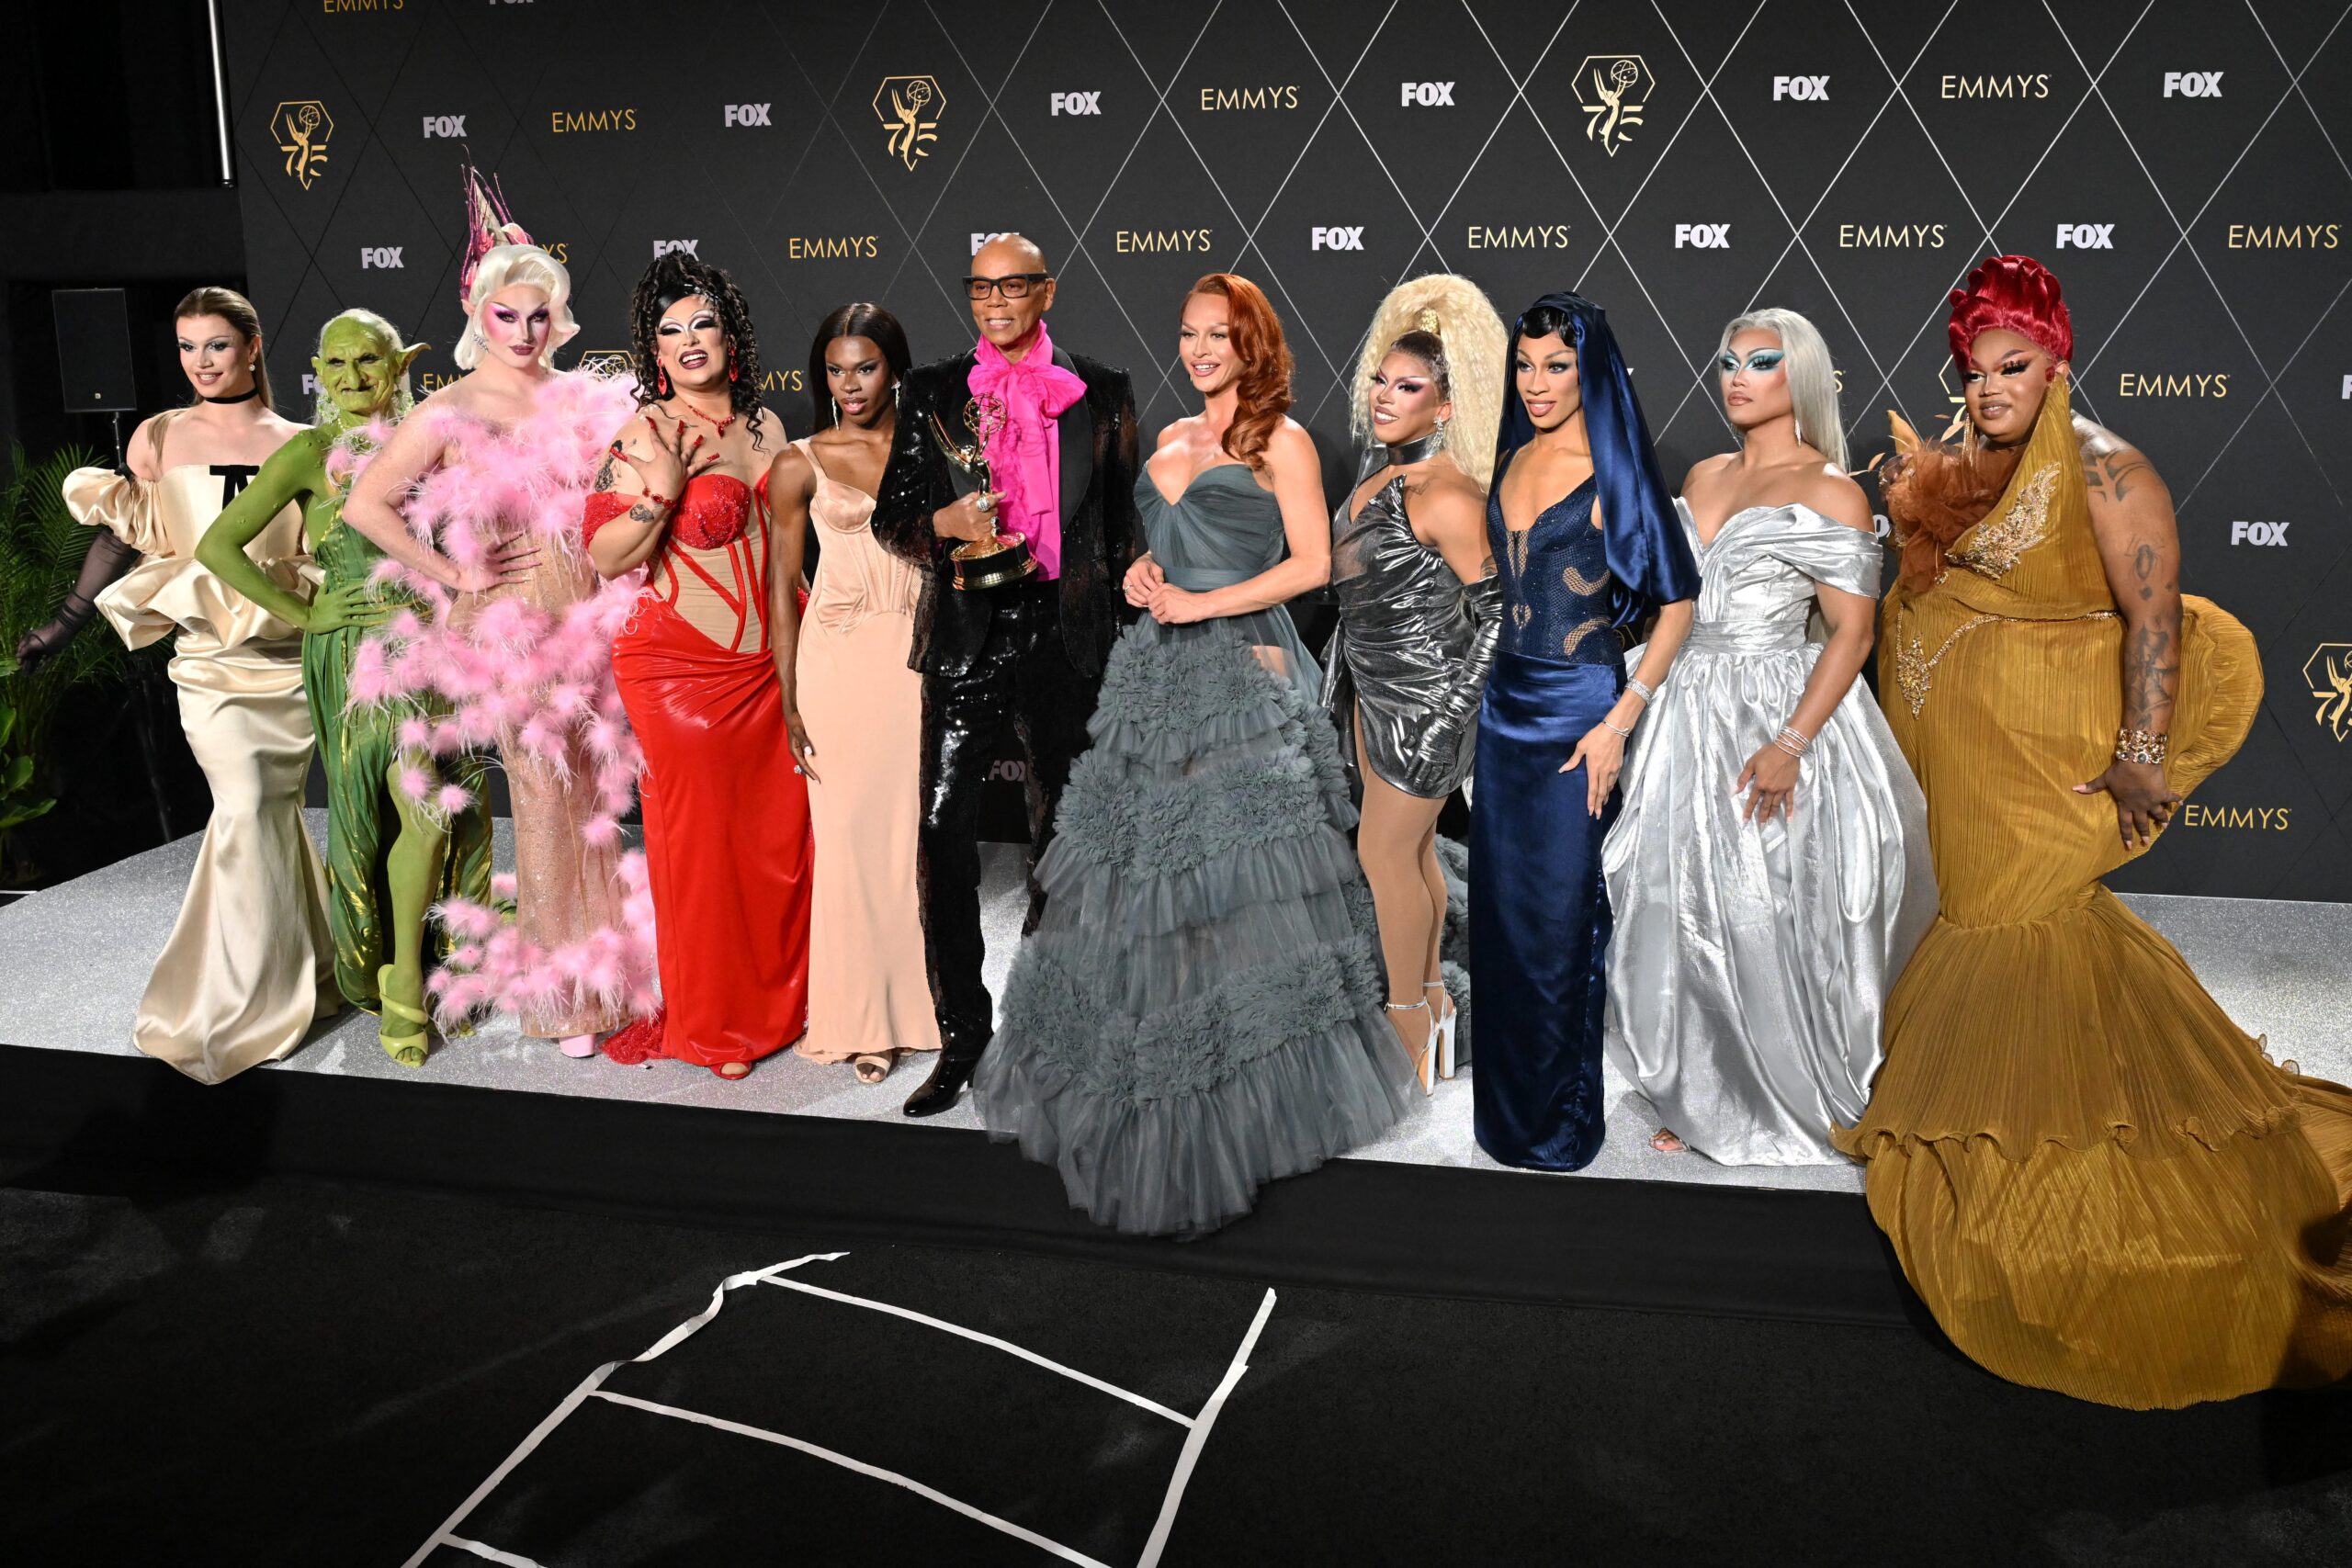 RuPaul and drag queens posing at the Emmy's.